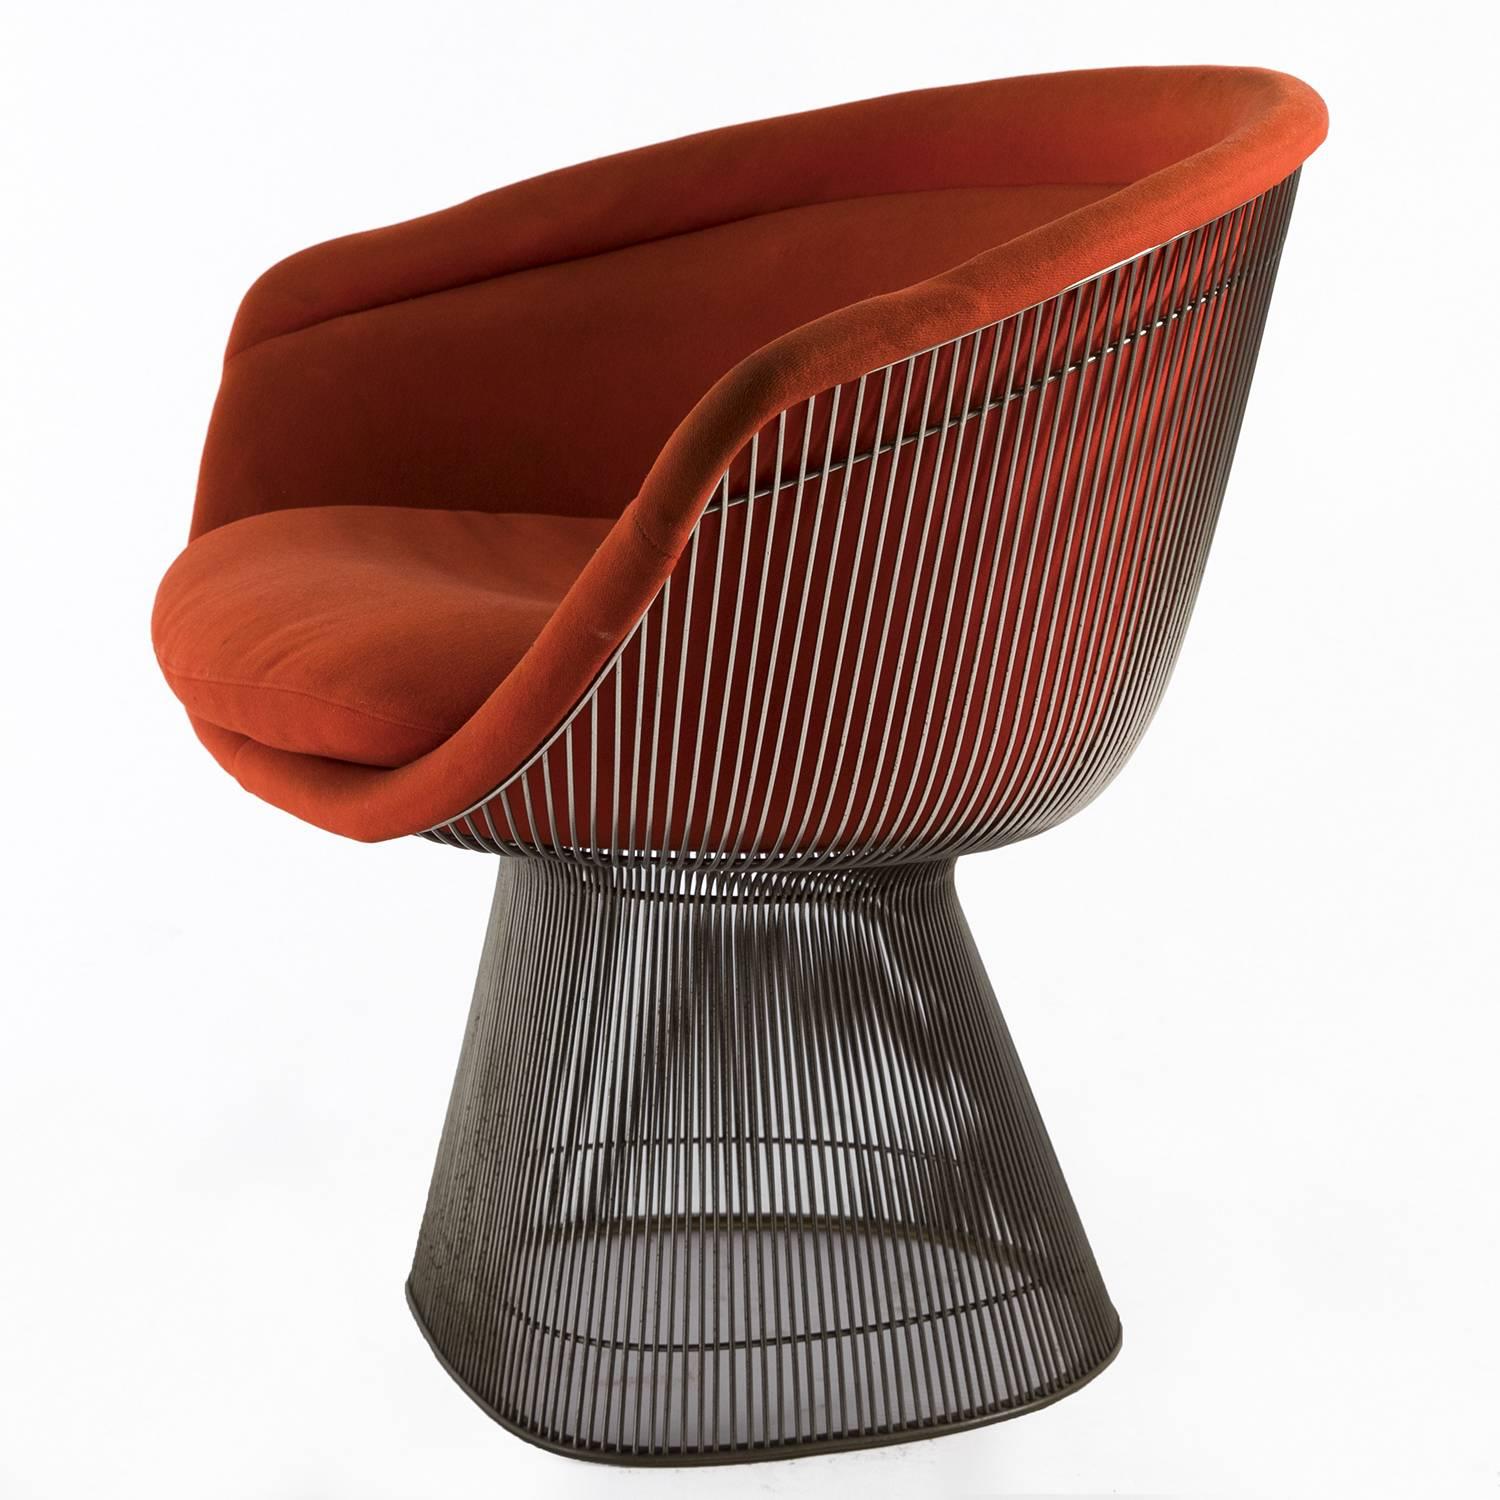 Original Warren Platner lounge chair for Knoll, circa 1966. Nickel-plate steel and original upholstery, fading and small upholstery cut on the back.